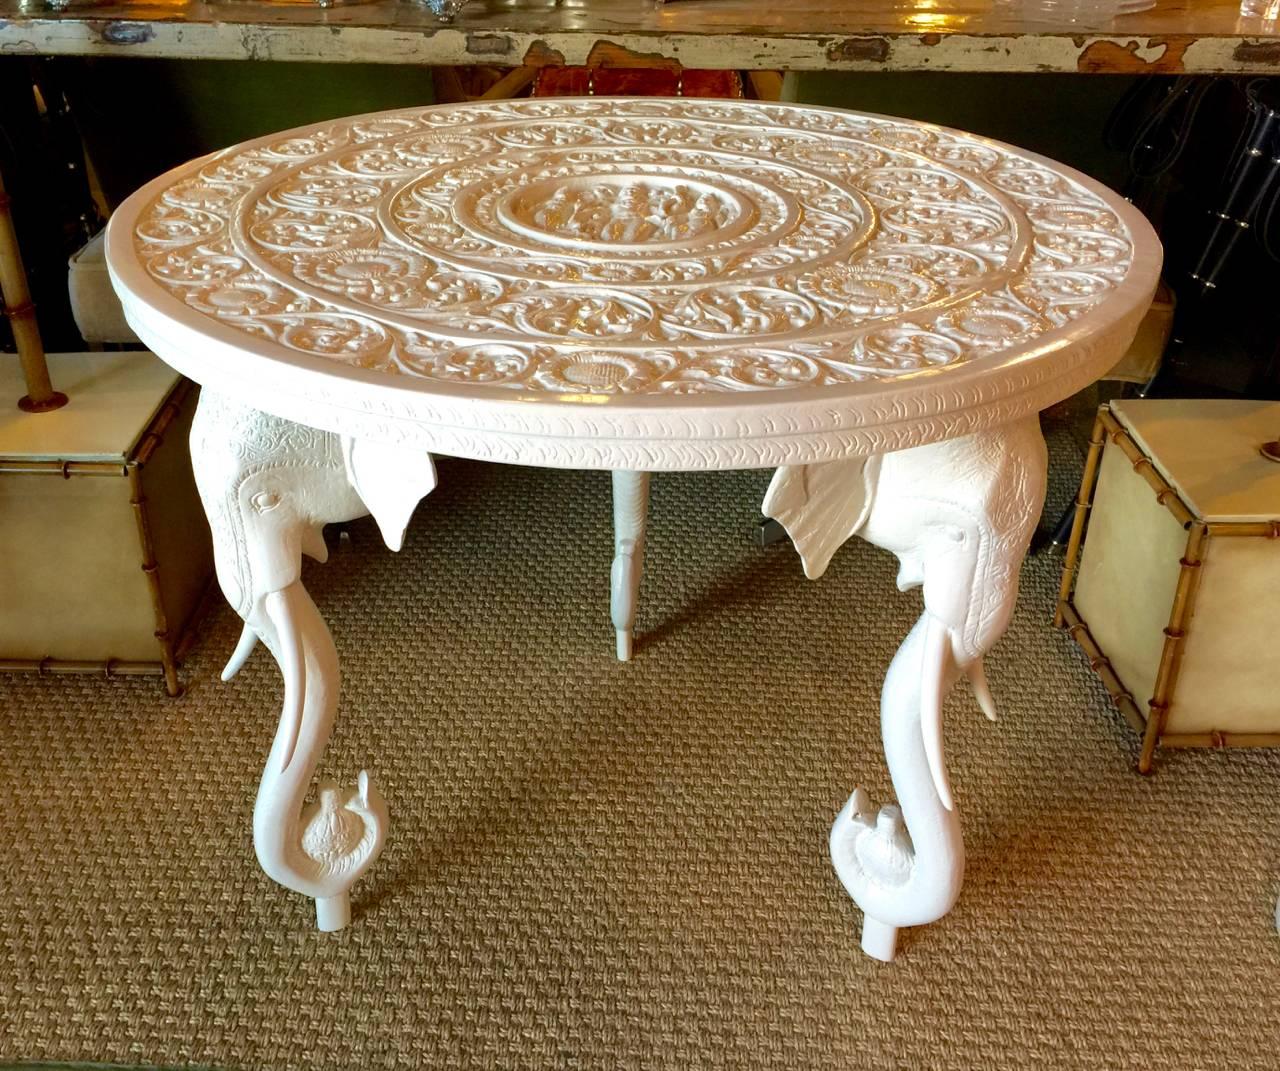 This is a stunning elephant table by Gampel-Stoll that was created in the 1970s. The top of the table is carved wood and the elephant head supports are composition. The table is newly lacquered in a creamy white; there have been restorations to the